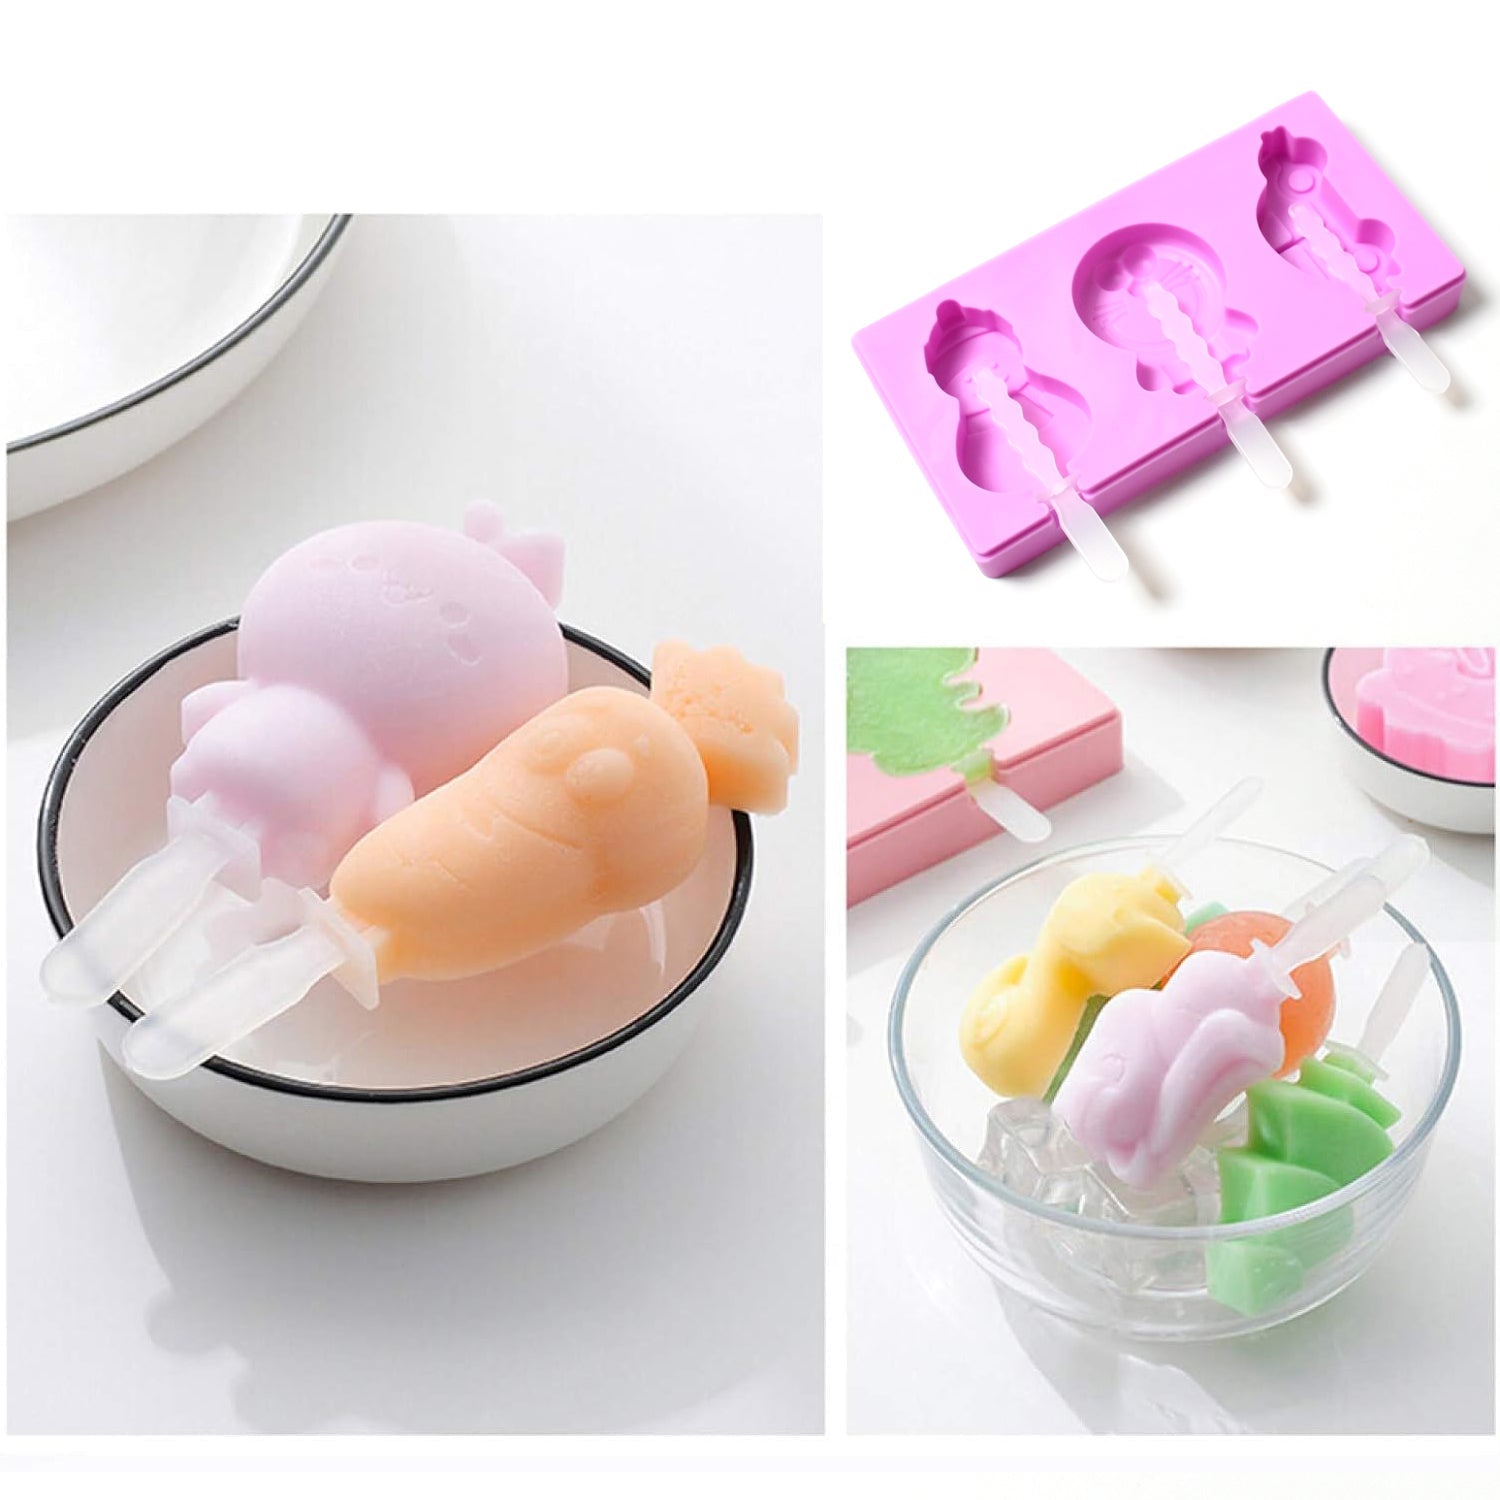 8188 Silicone Popsicle Molds, Reusable Ice Cream Molds With Sticks And Lids. A Must-Have Popsicle Mold For Summer. 